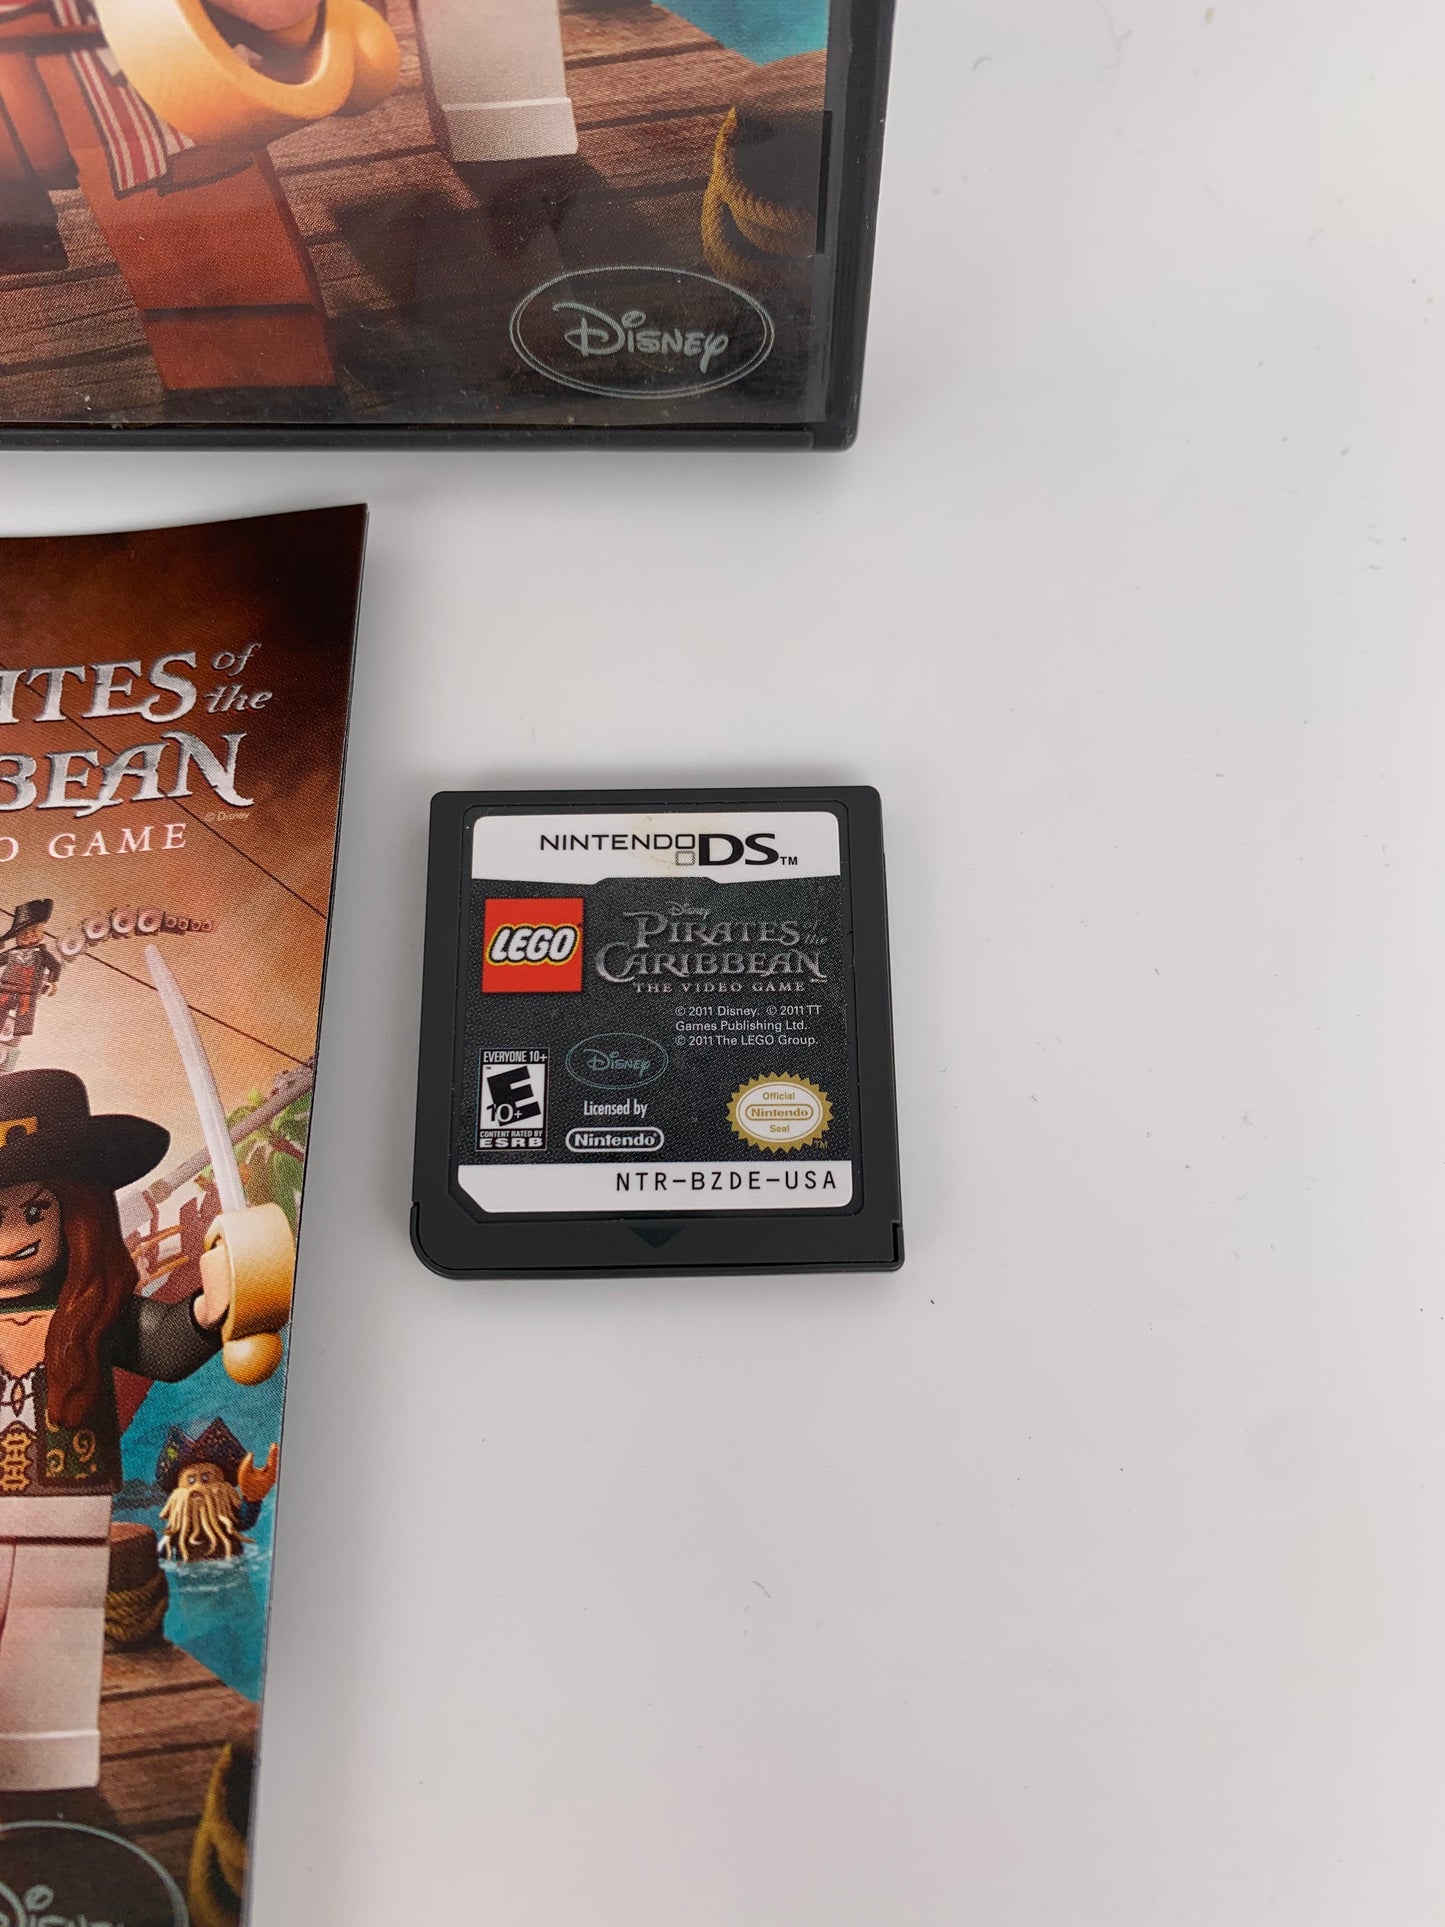 NiNTENDO DS | LEGO PiRATES OF THE CARiBBEAN THE ViDEO GAME